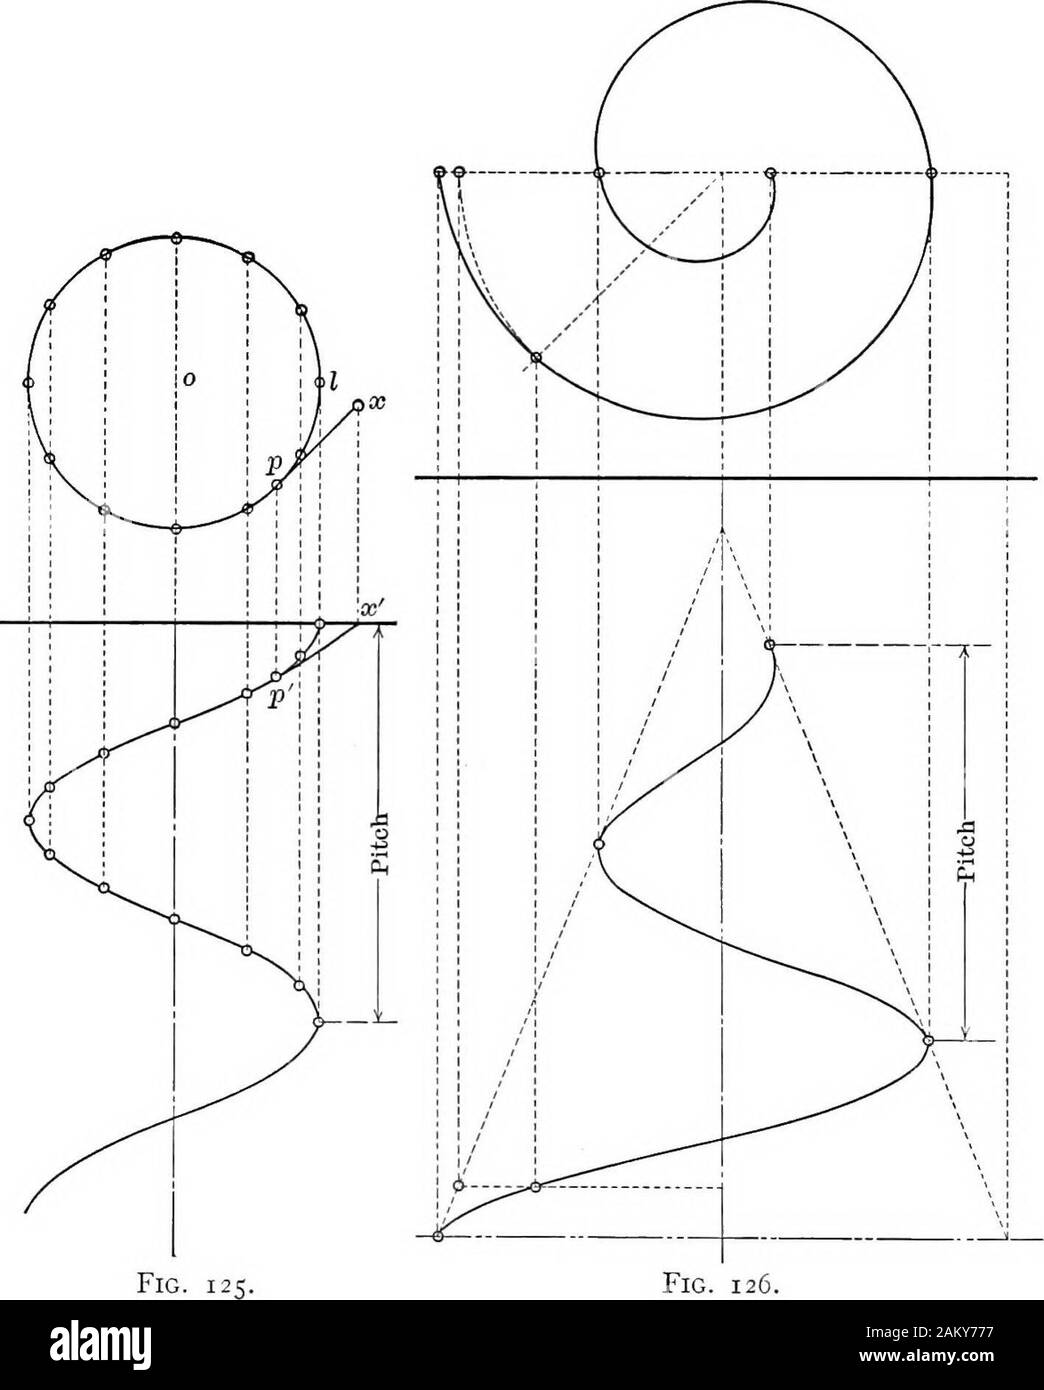 The essentials of descriptive geometry . end will follow a path in space  which is a curveof double curvature called a helix. It must be apparent  that allpoints between these extreme points